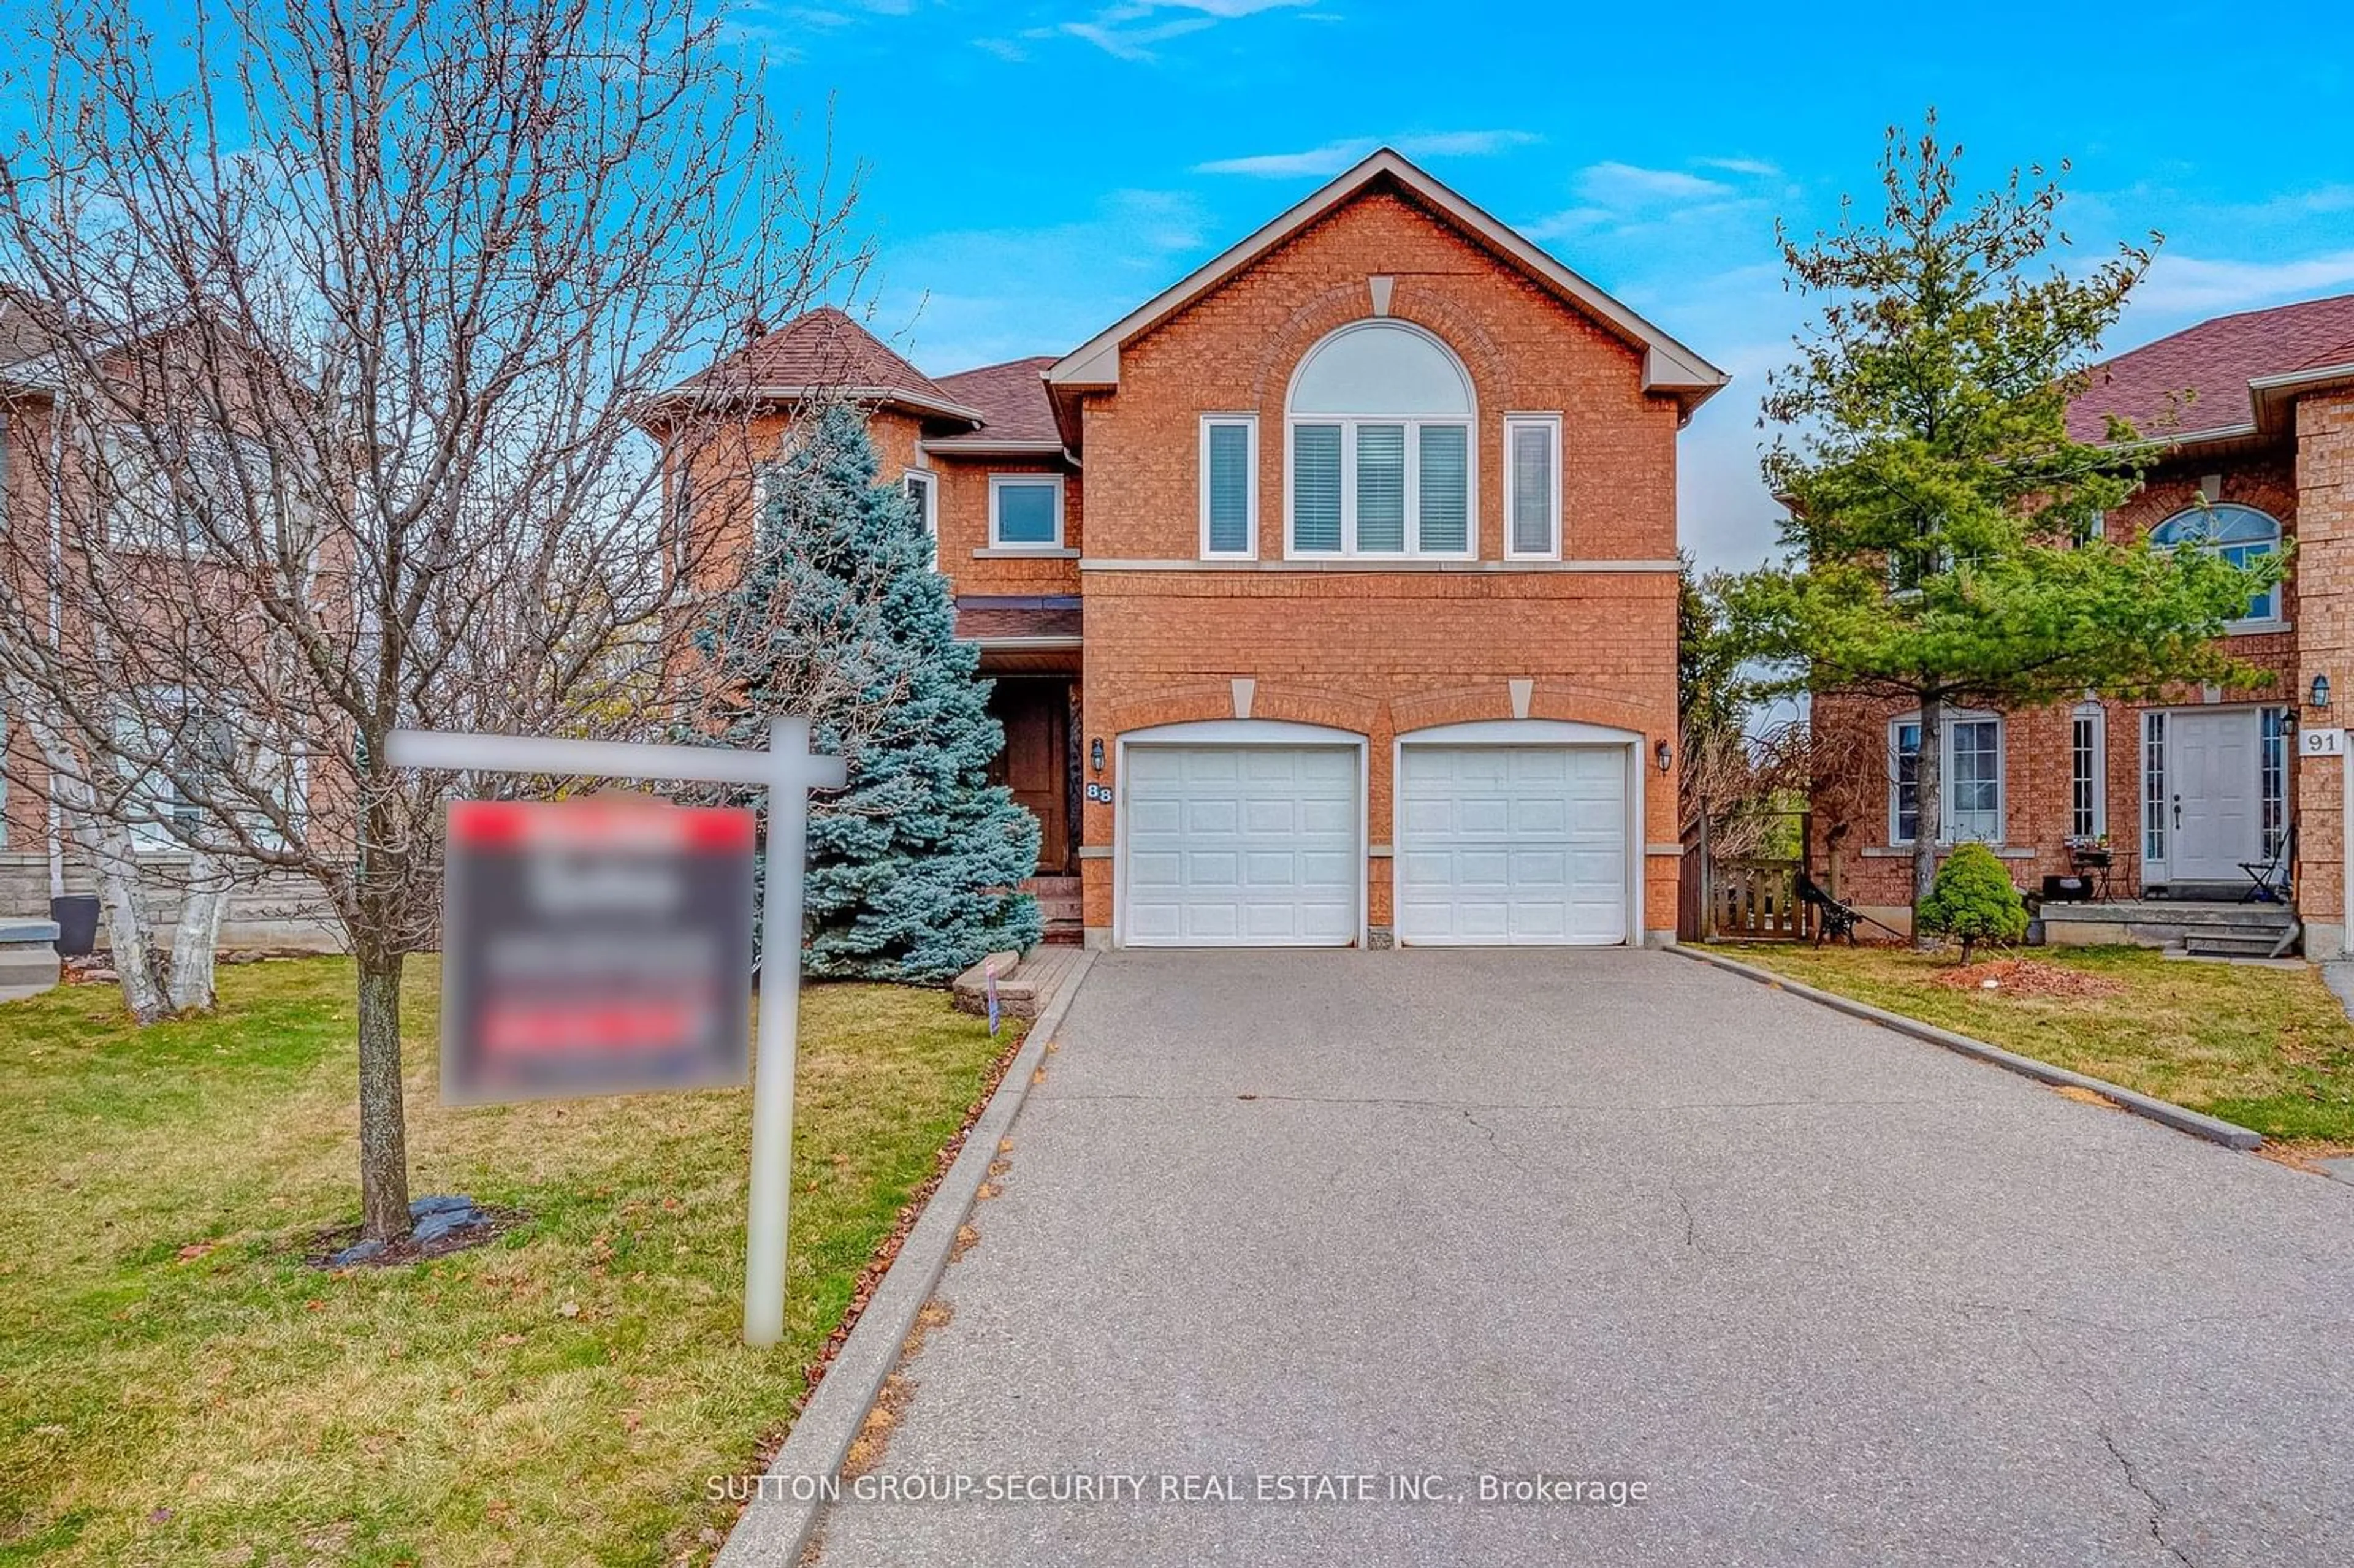 Home with brick exterior material for 88 Klamath Crt, Vaughan Ontario L6A 2L7